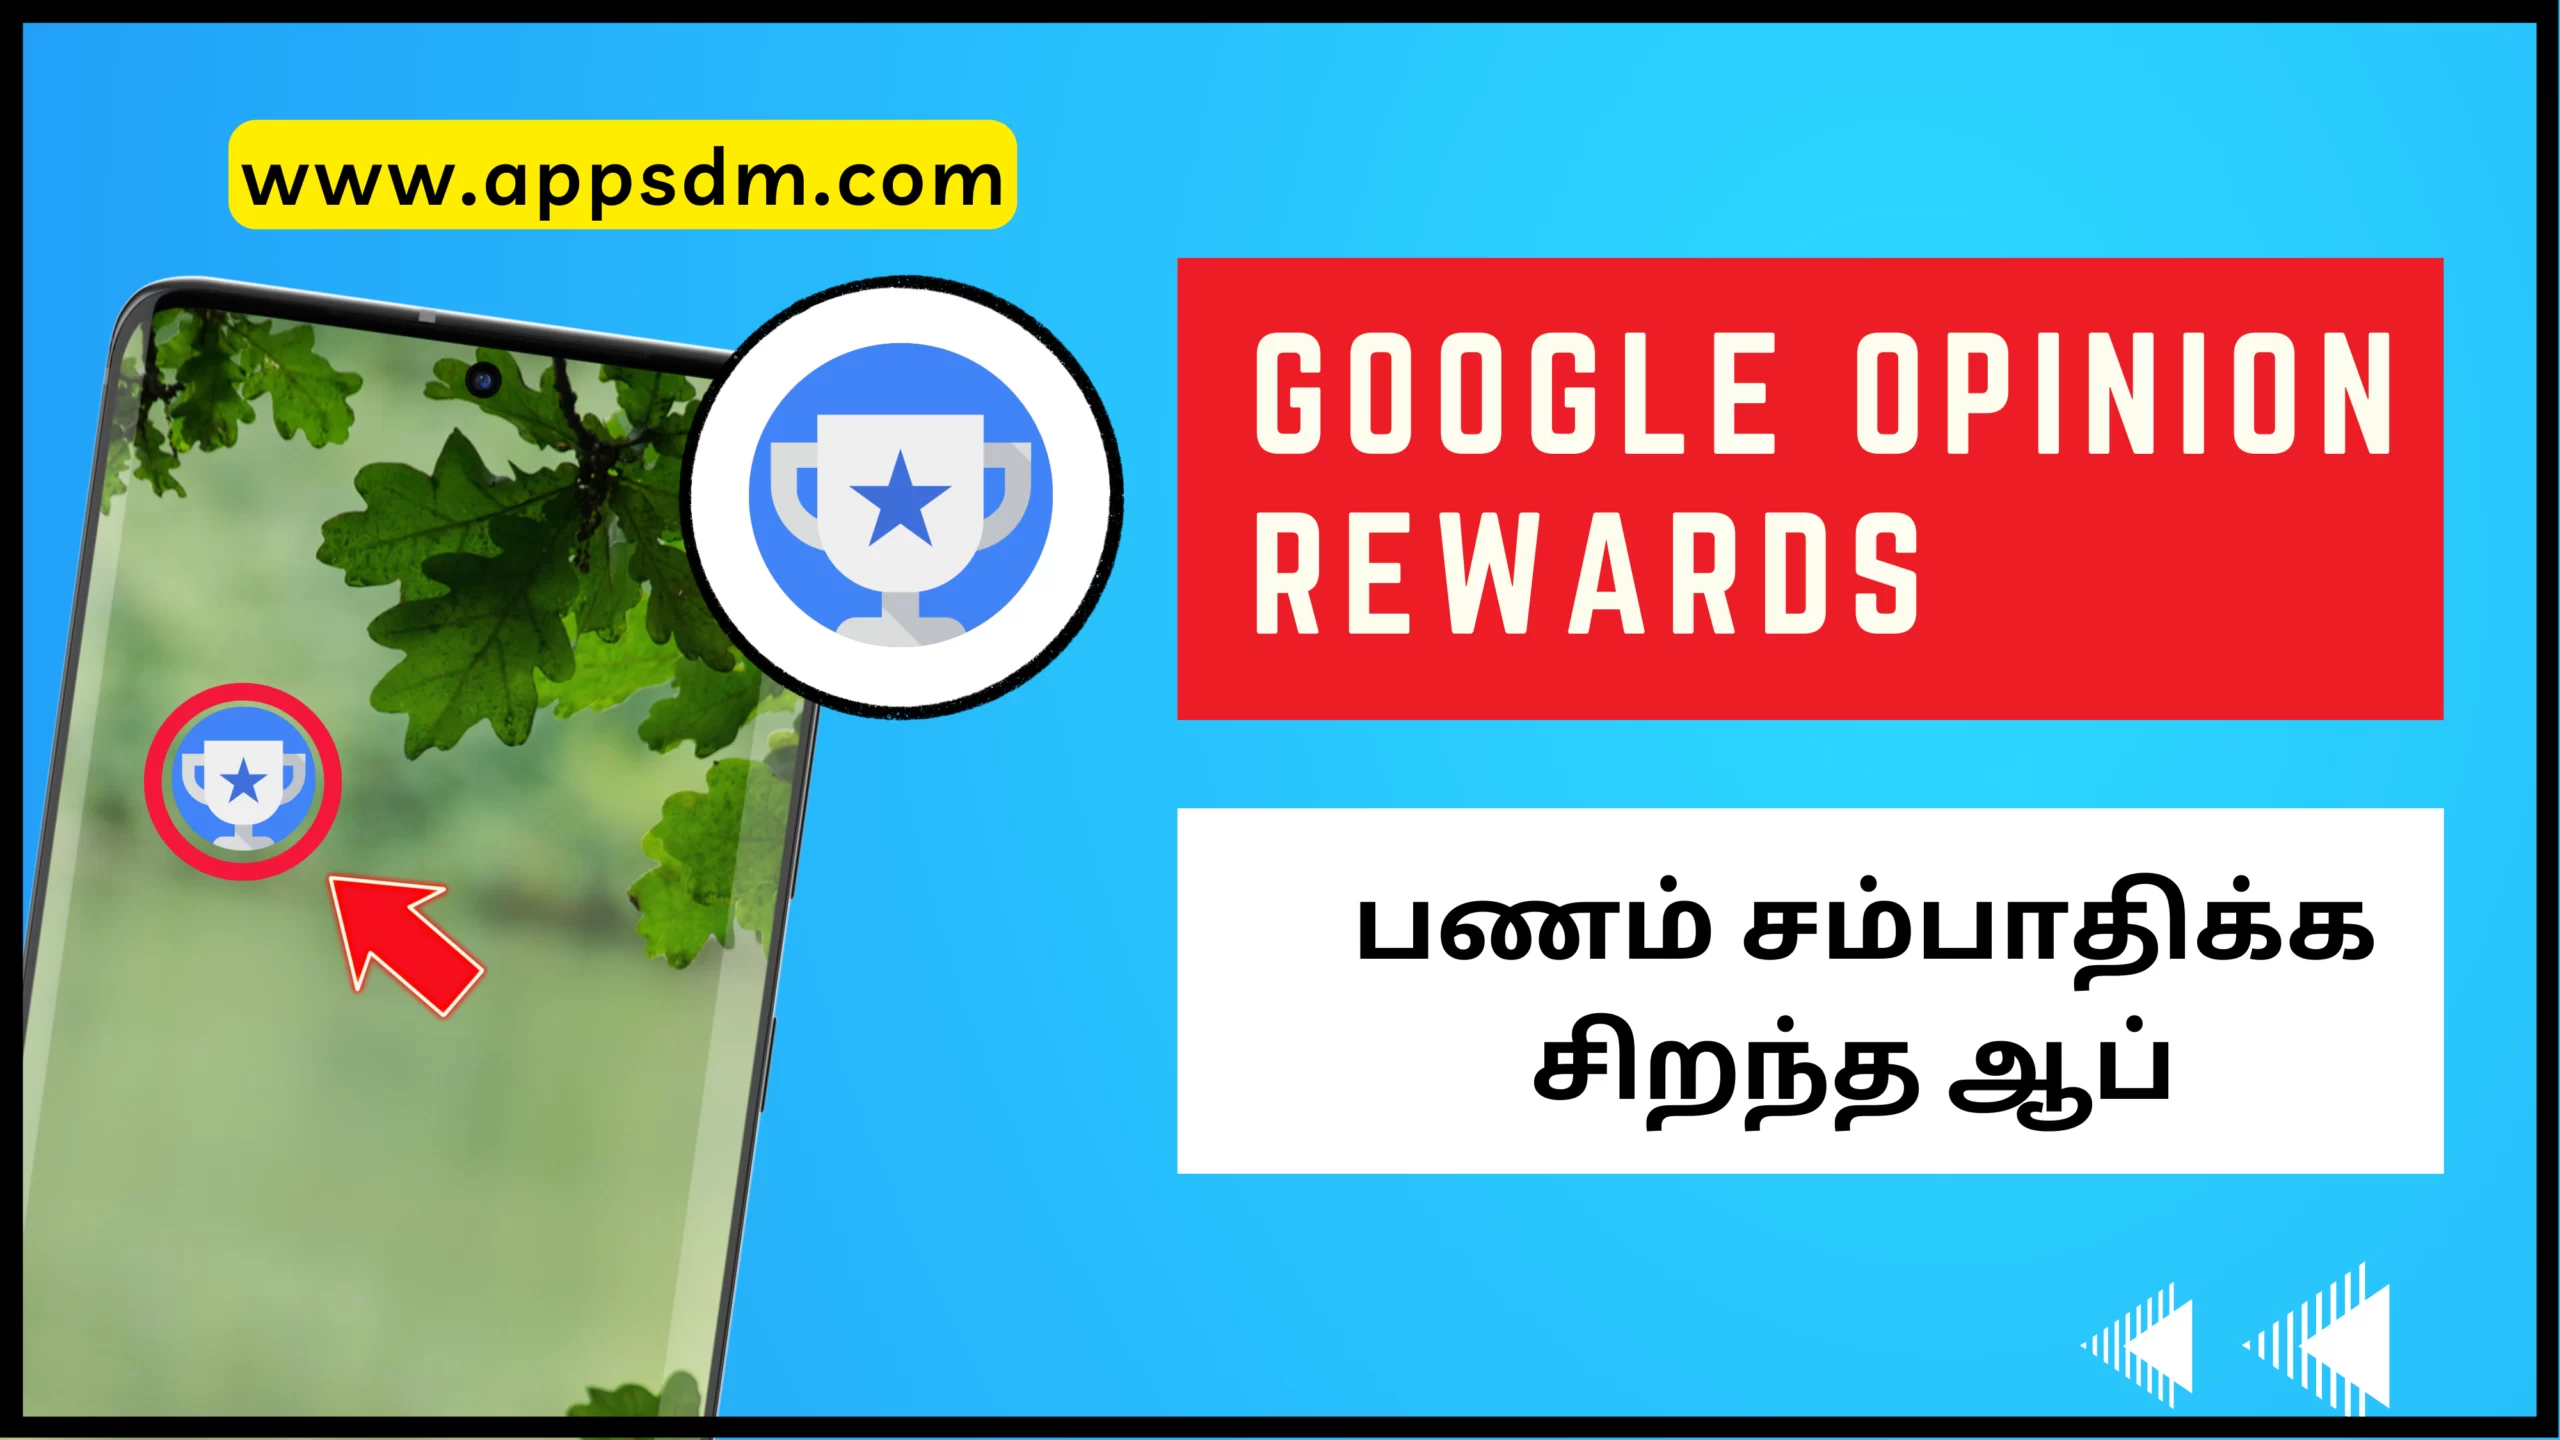 a-new-way-to-make-money-online-google-opinion-rewards-explained